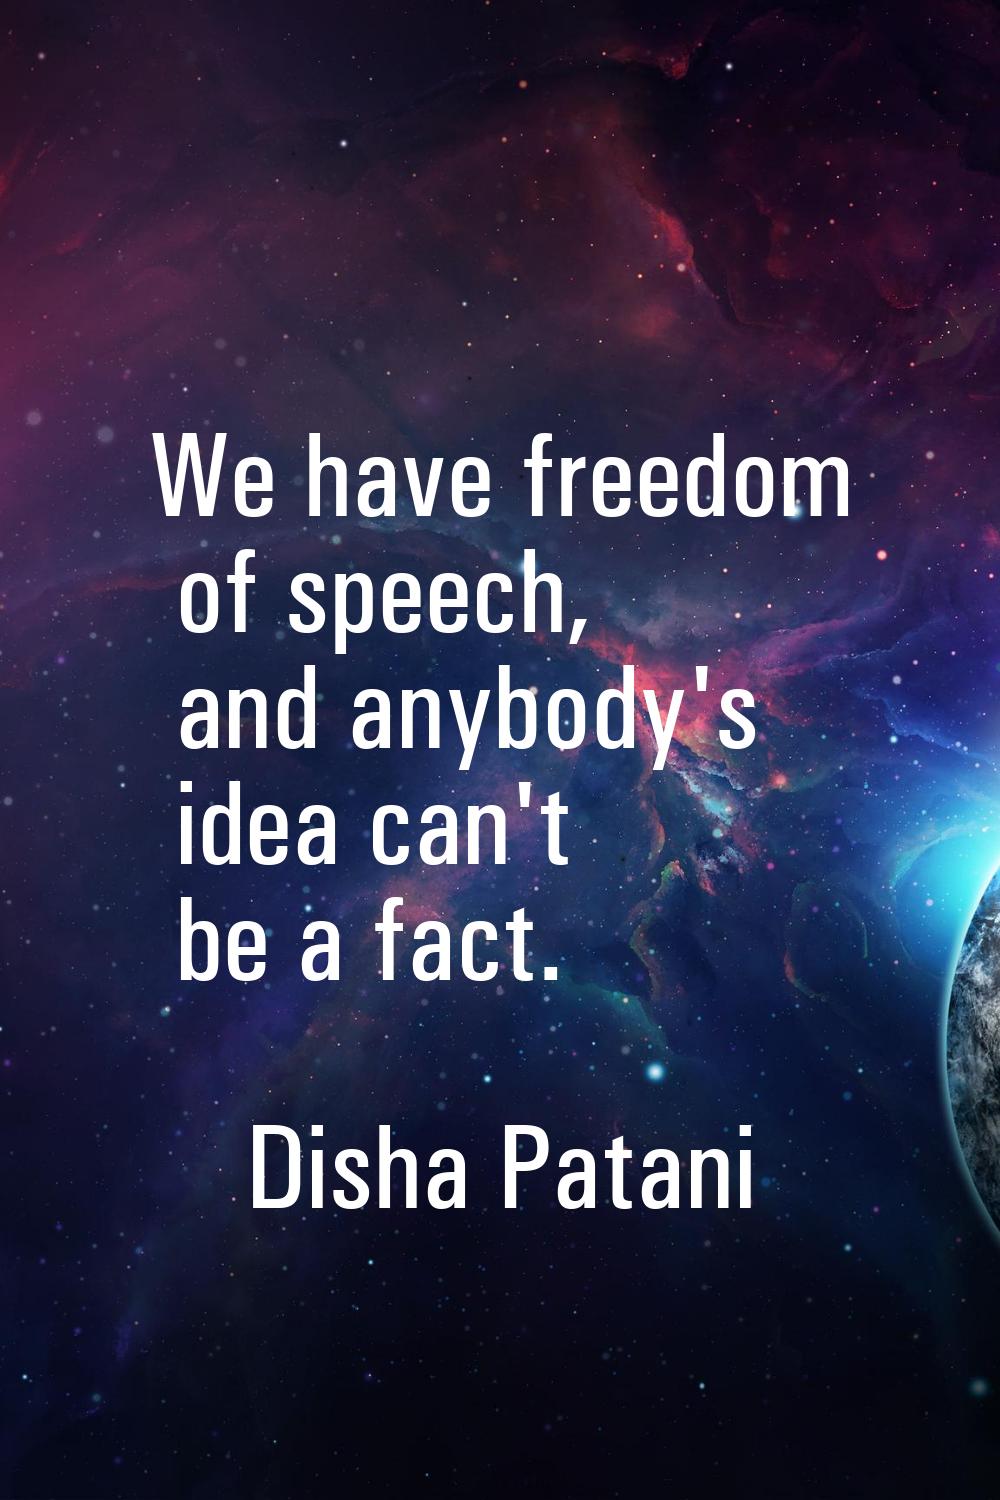 We have freedom of speech, and anybody's idea can't be a fact.